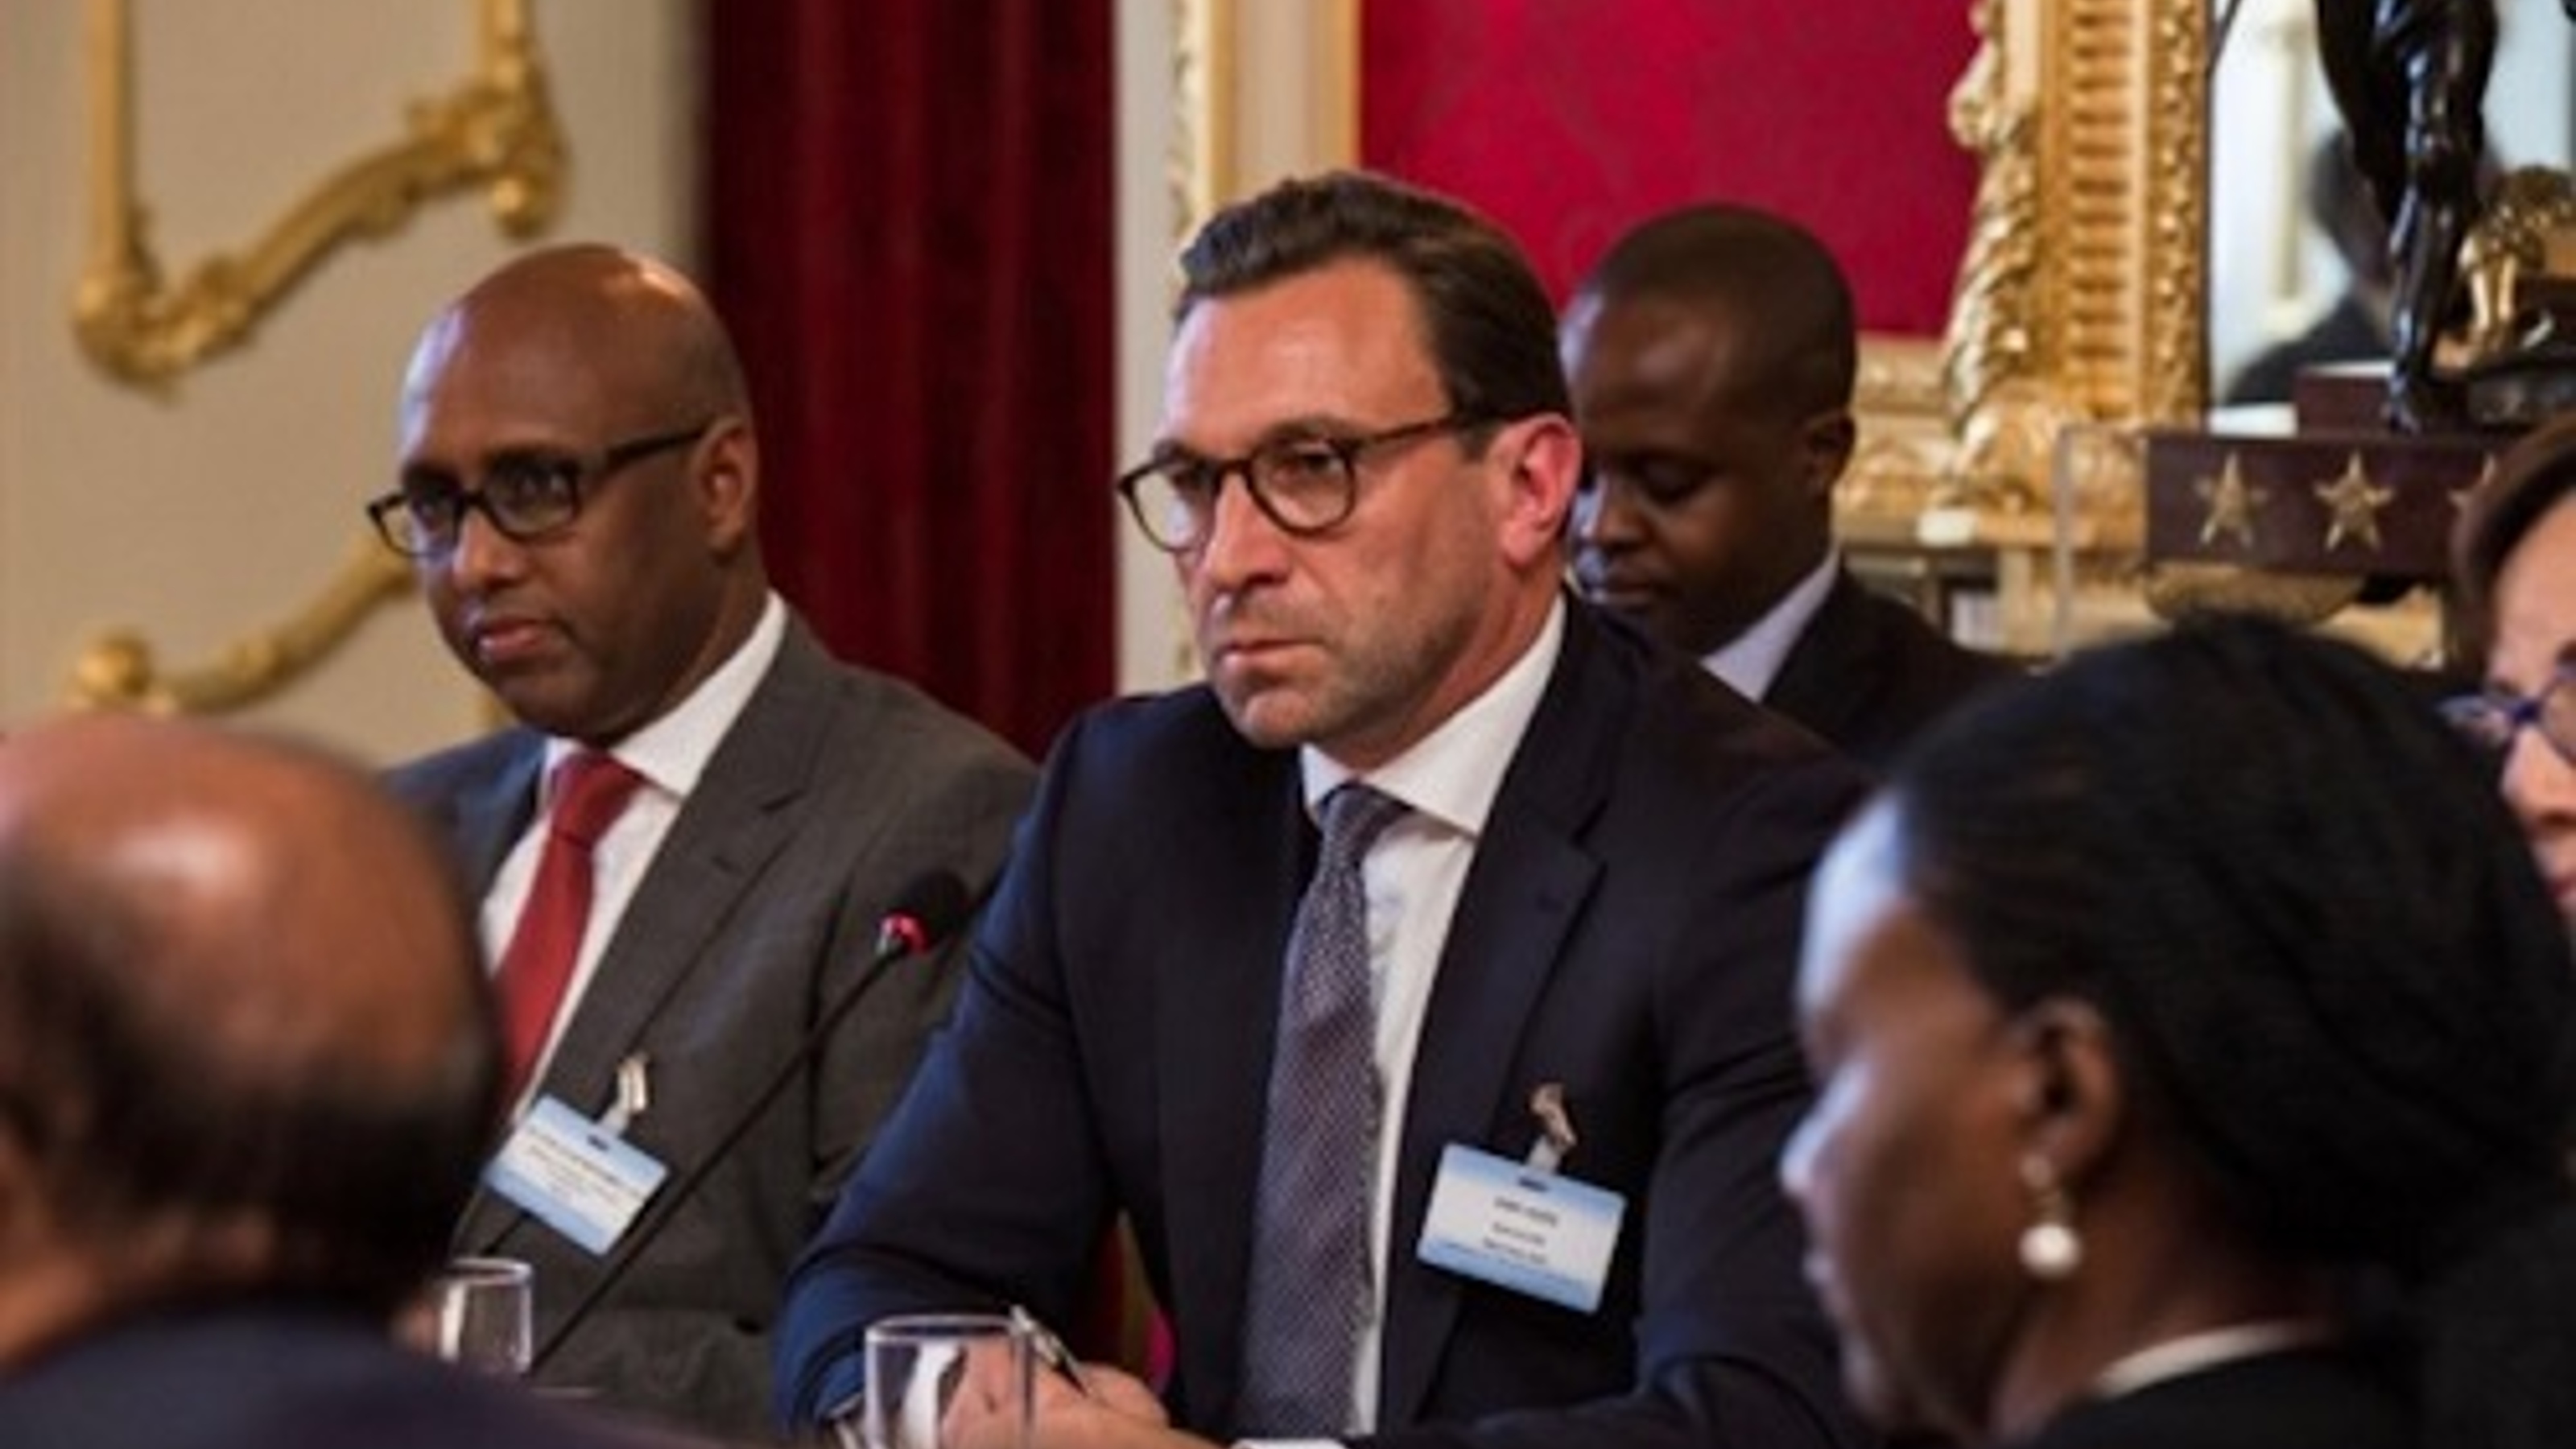 Kirk Hope co-chairing a session at the Commonwealth Trade Ministers meeting in London, 2017.